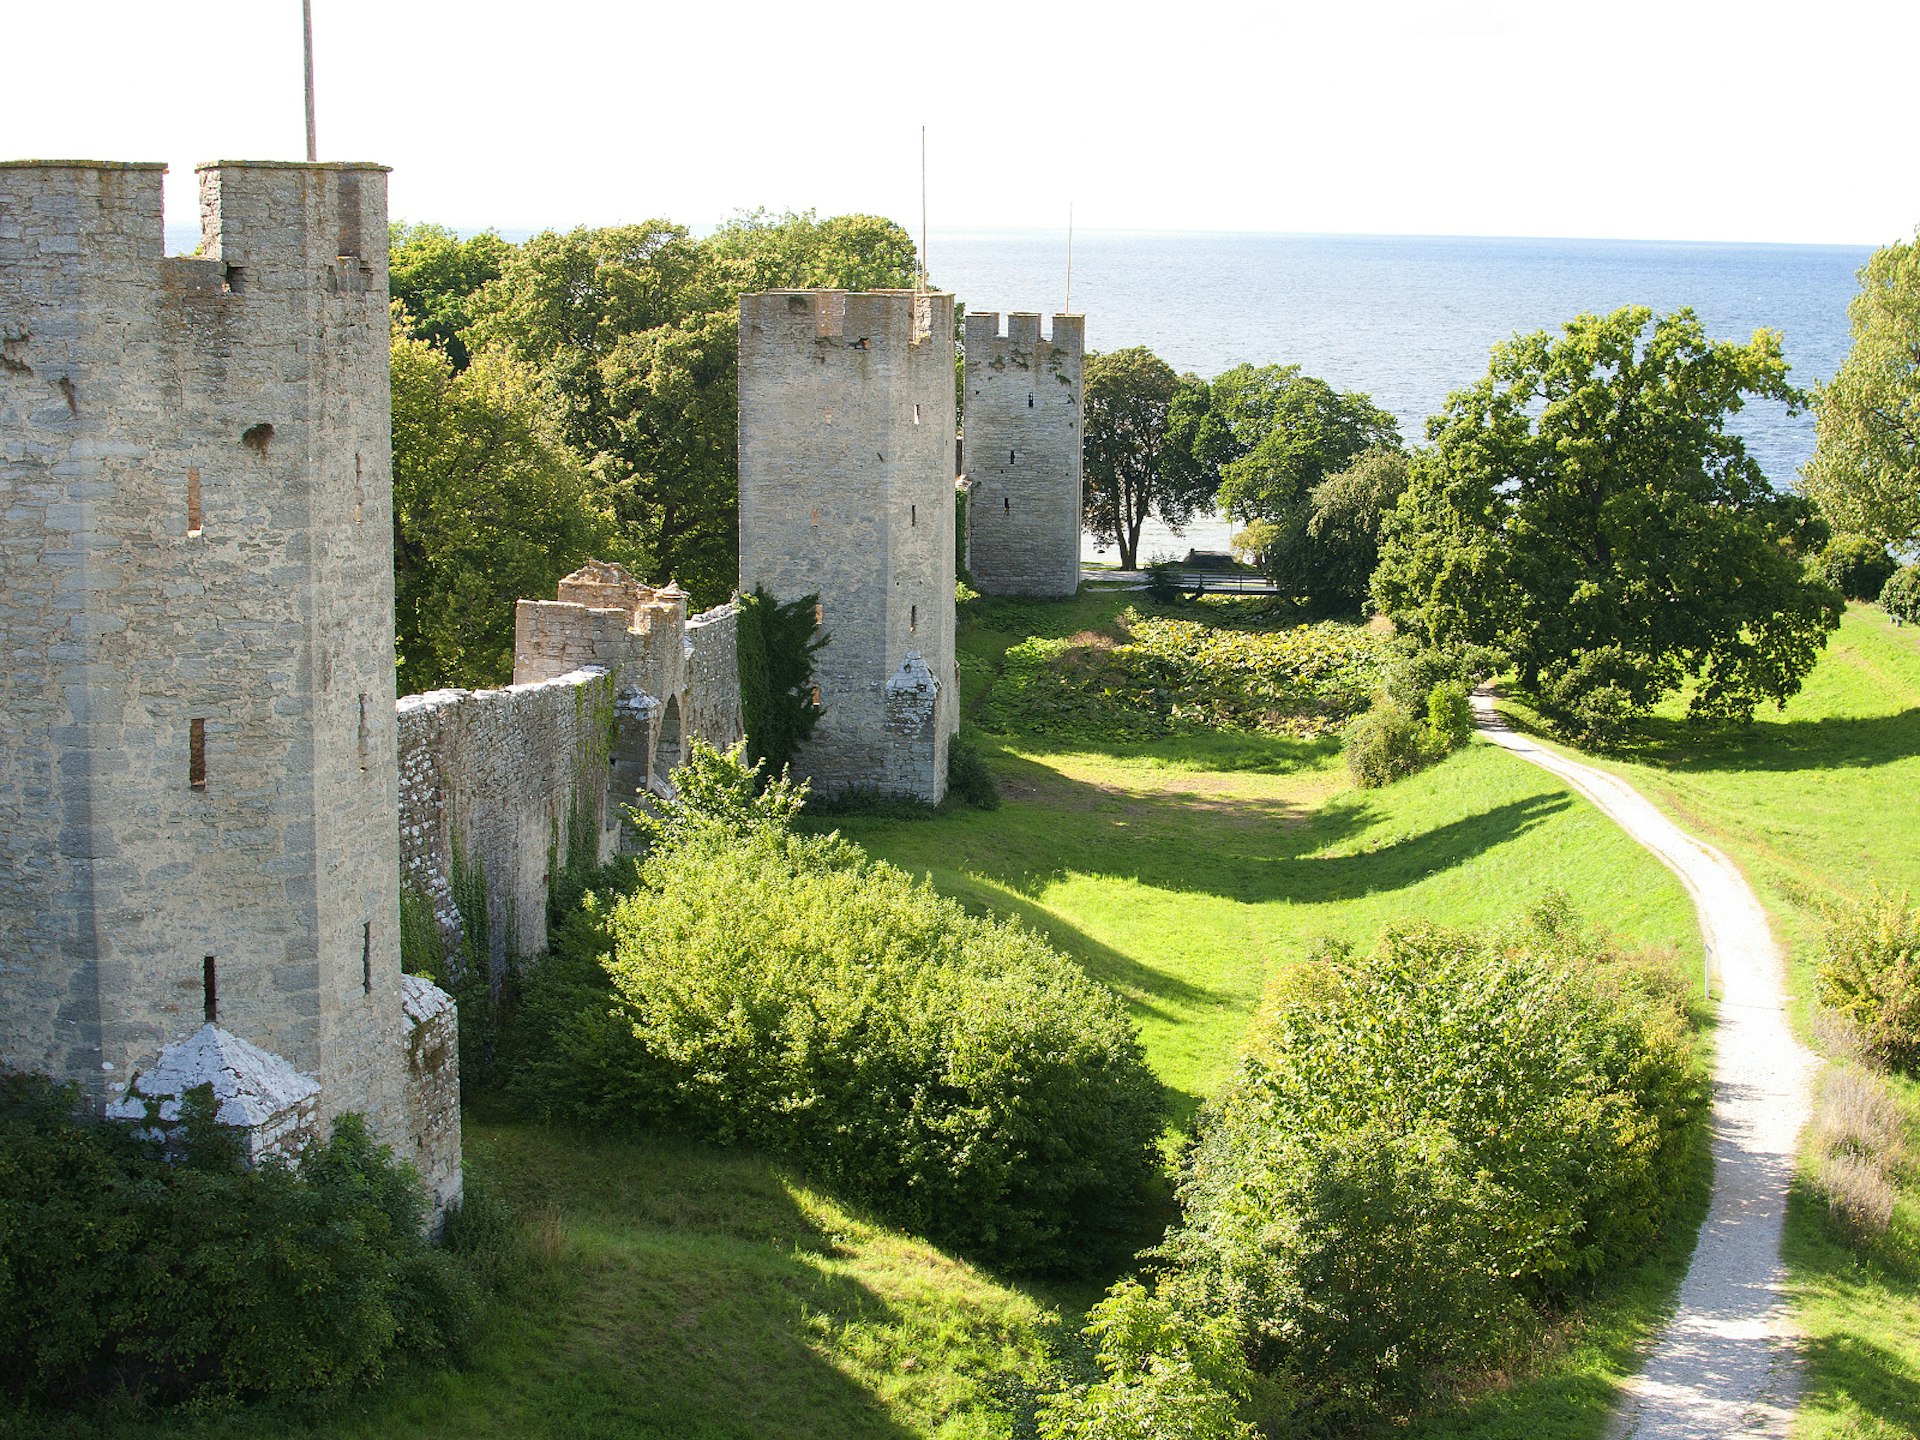 The medieval city of Visby